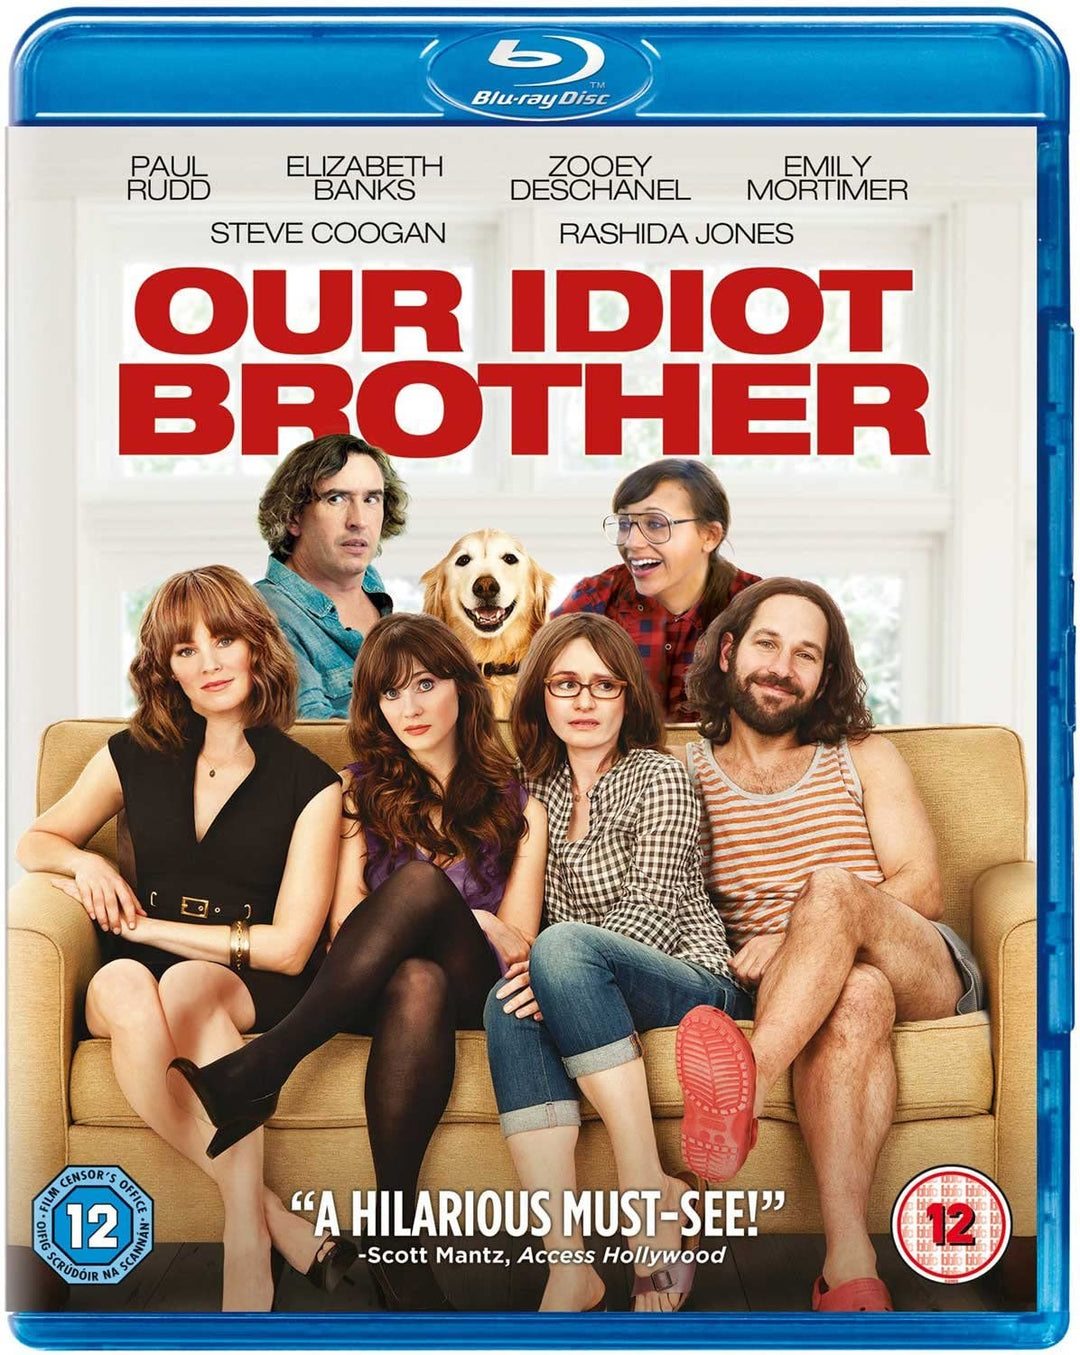 Our Idiot Brother - Comedy [Blu-ray]